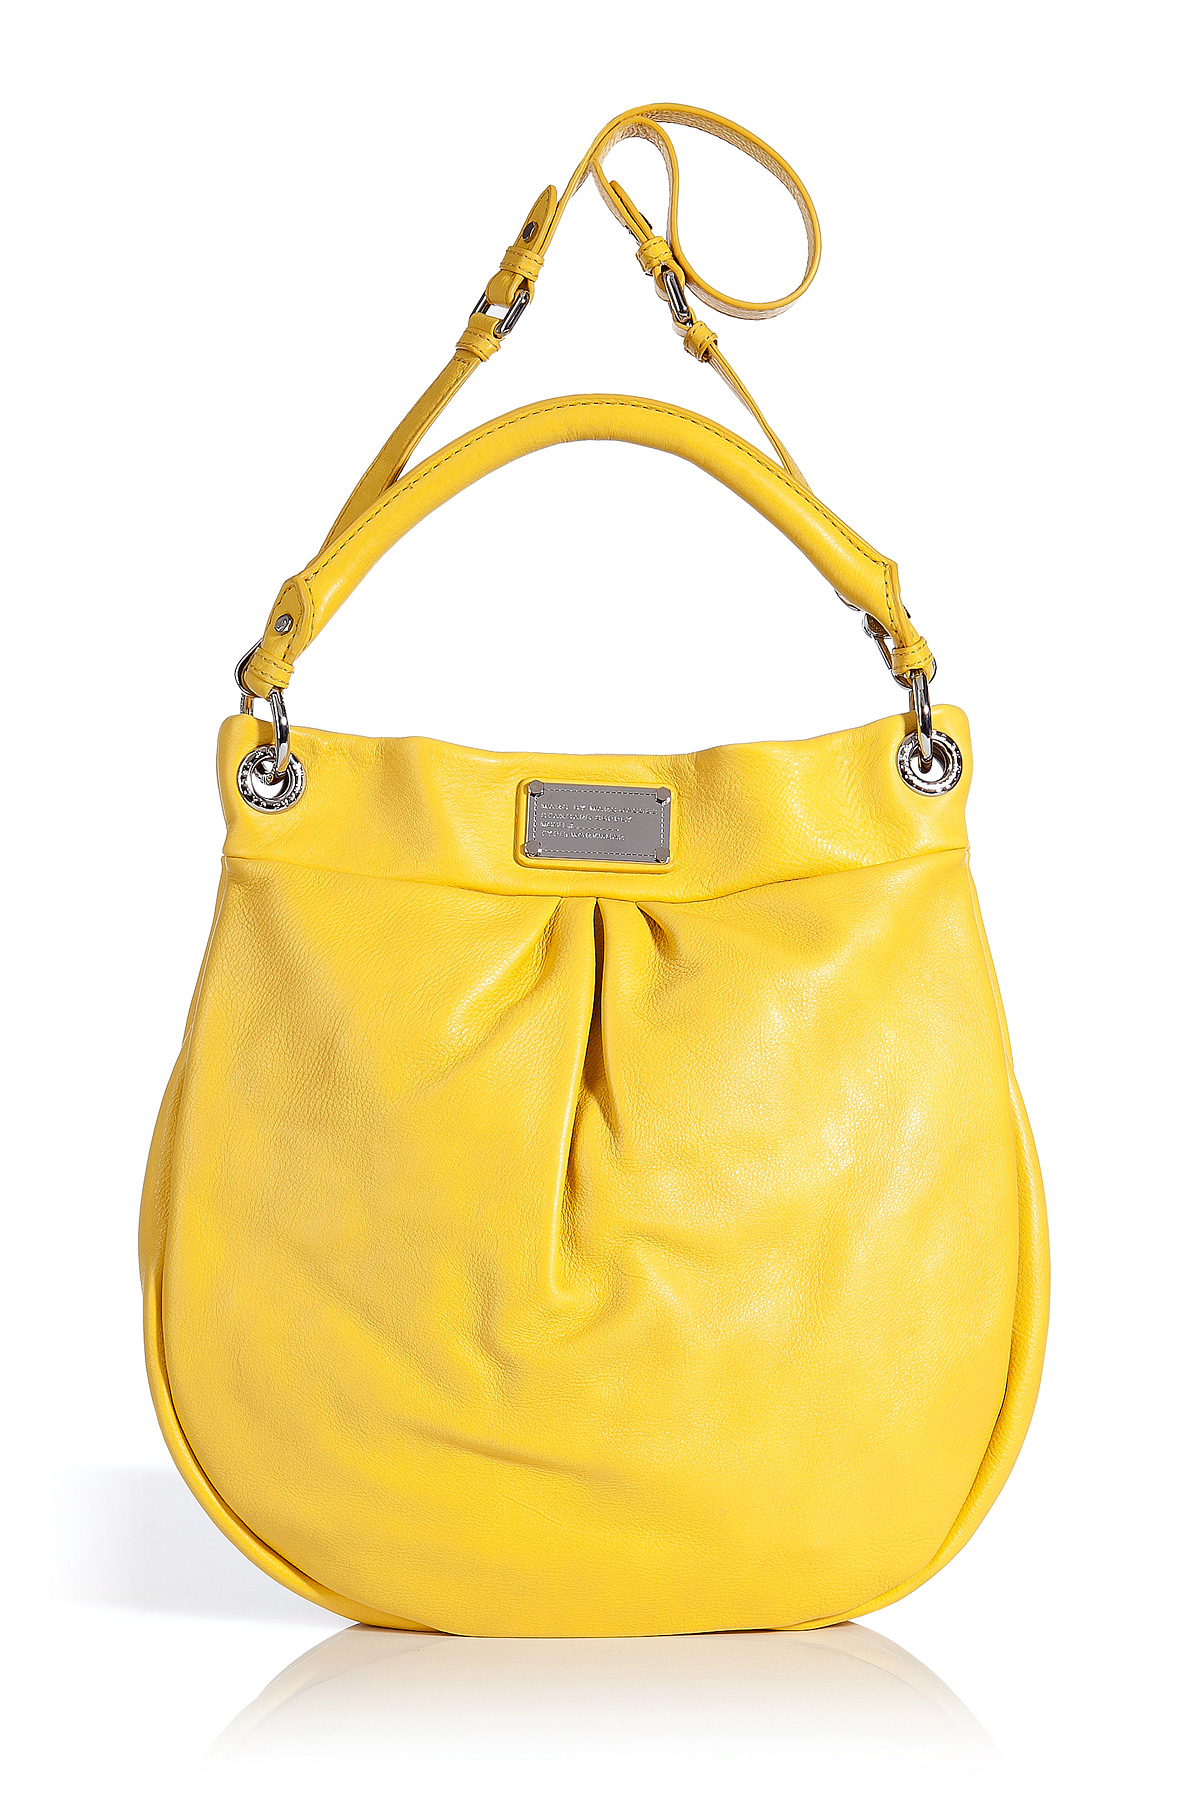 Marc By Marc Jacobs Yellow Hillier Shoulder Bag in Yellow | Lyst